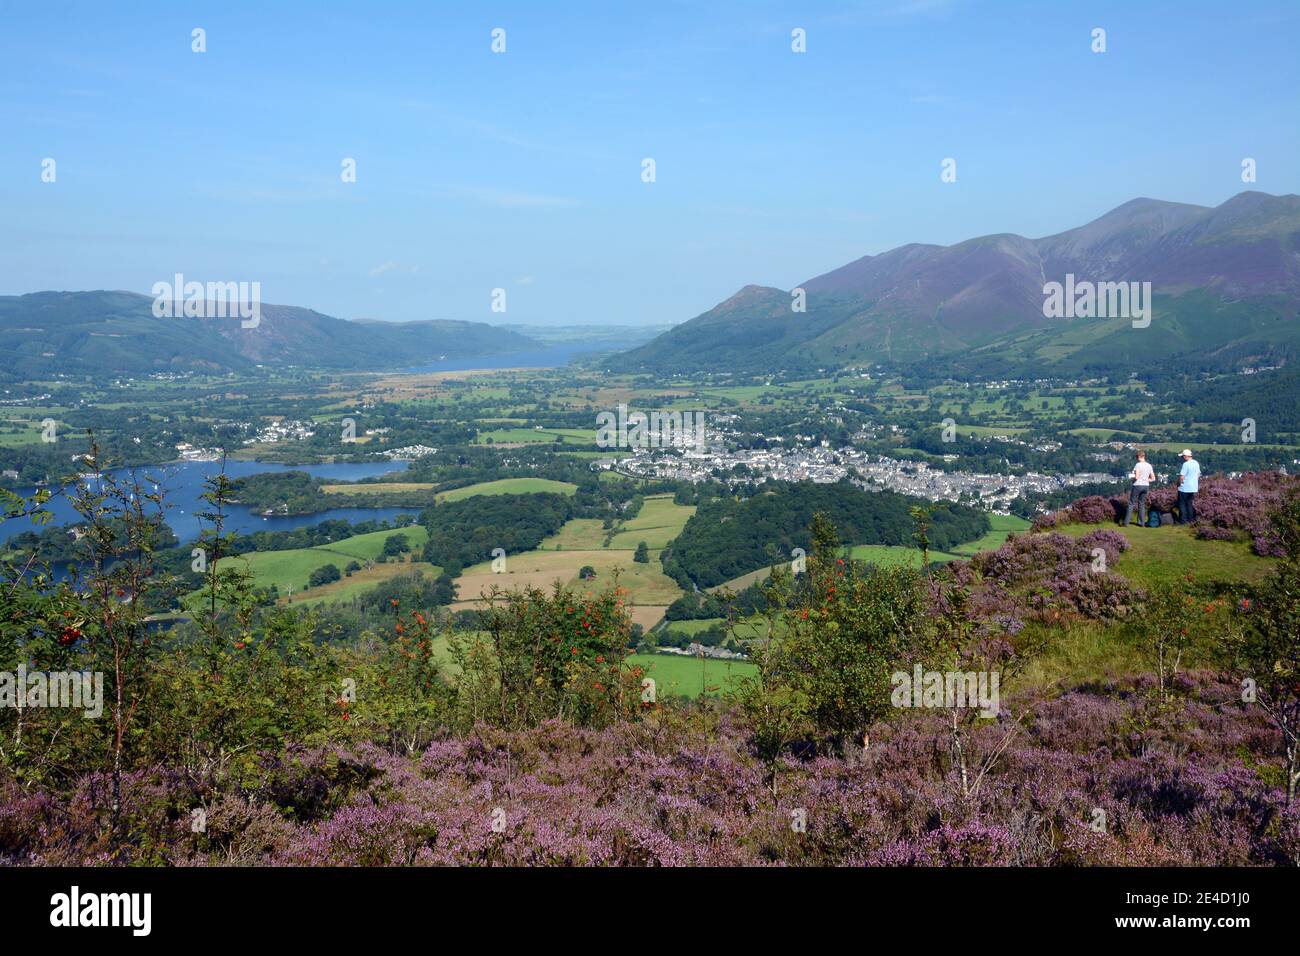 2 walkers stop to take in the stunning view looking across to Keswick in the lake district, England. Stock Photo